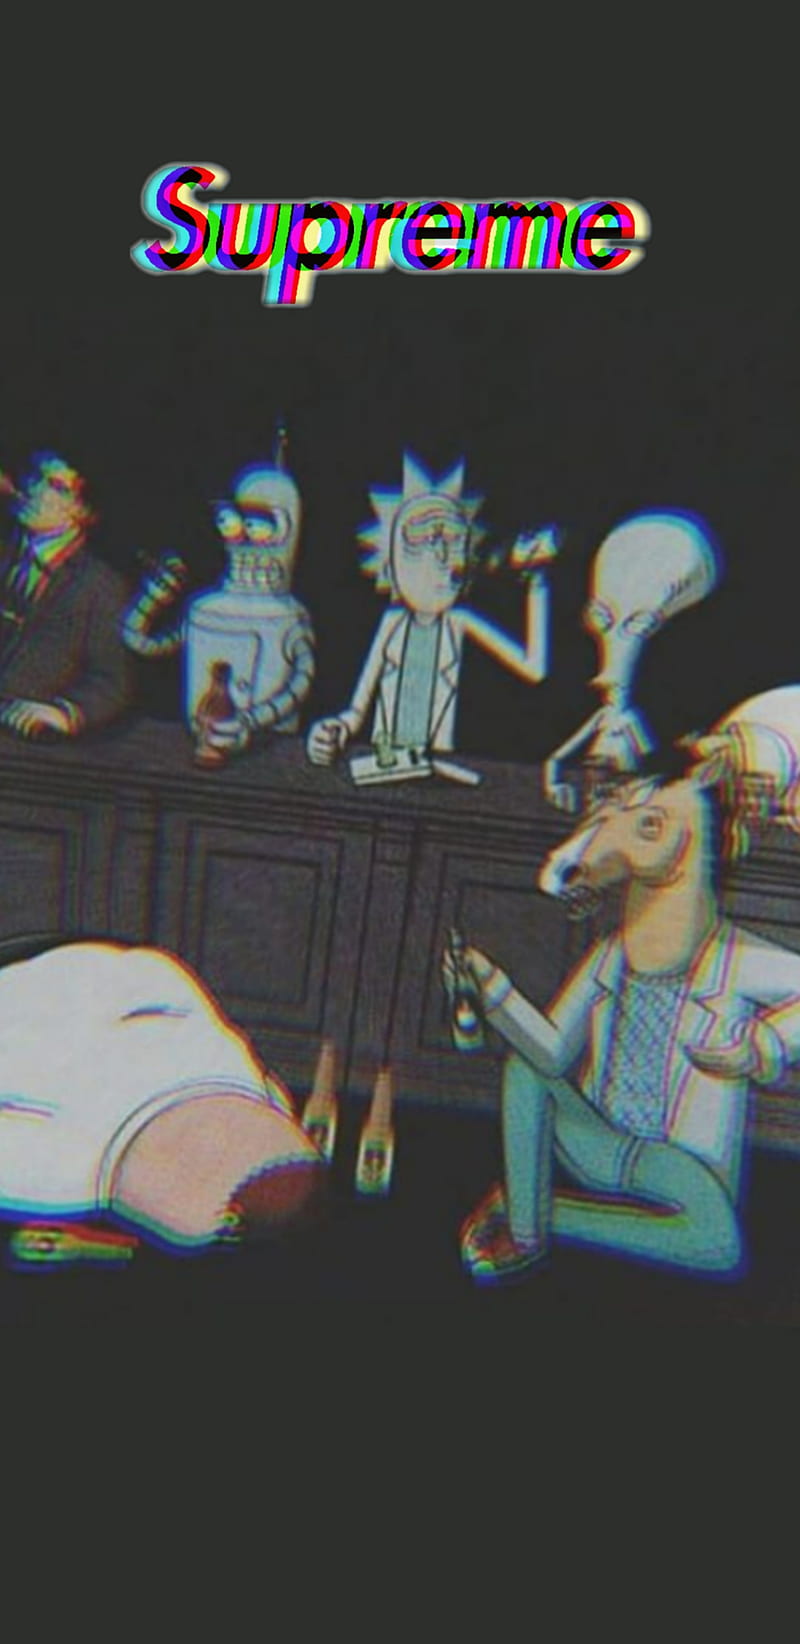 Wasted, bar, family guy, glitch, supreme, HD phone wallpaper